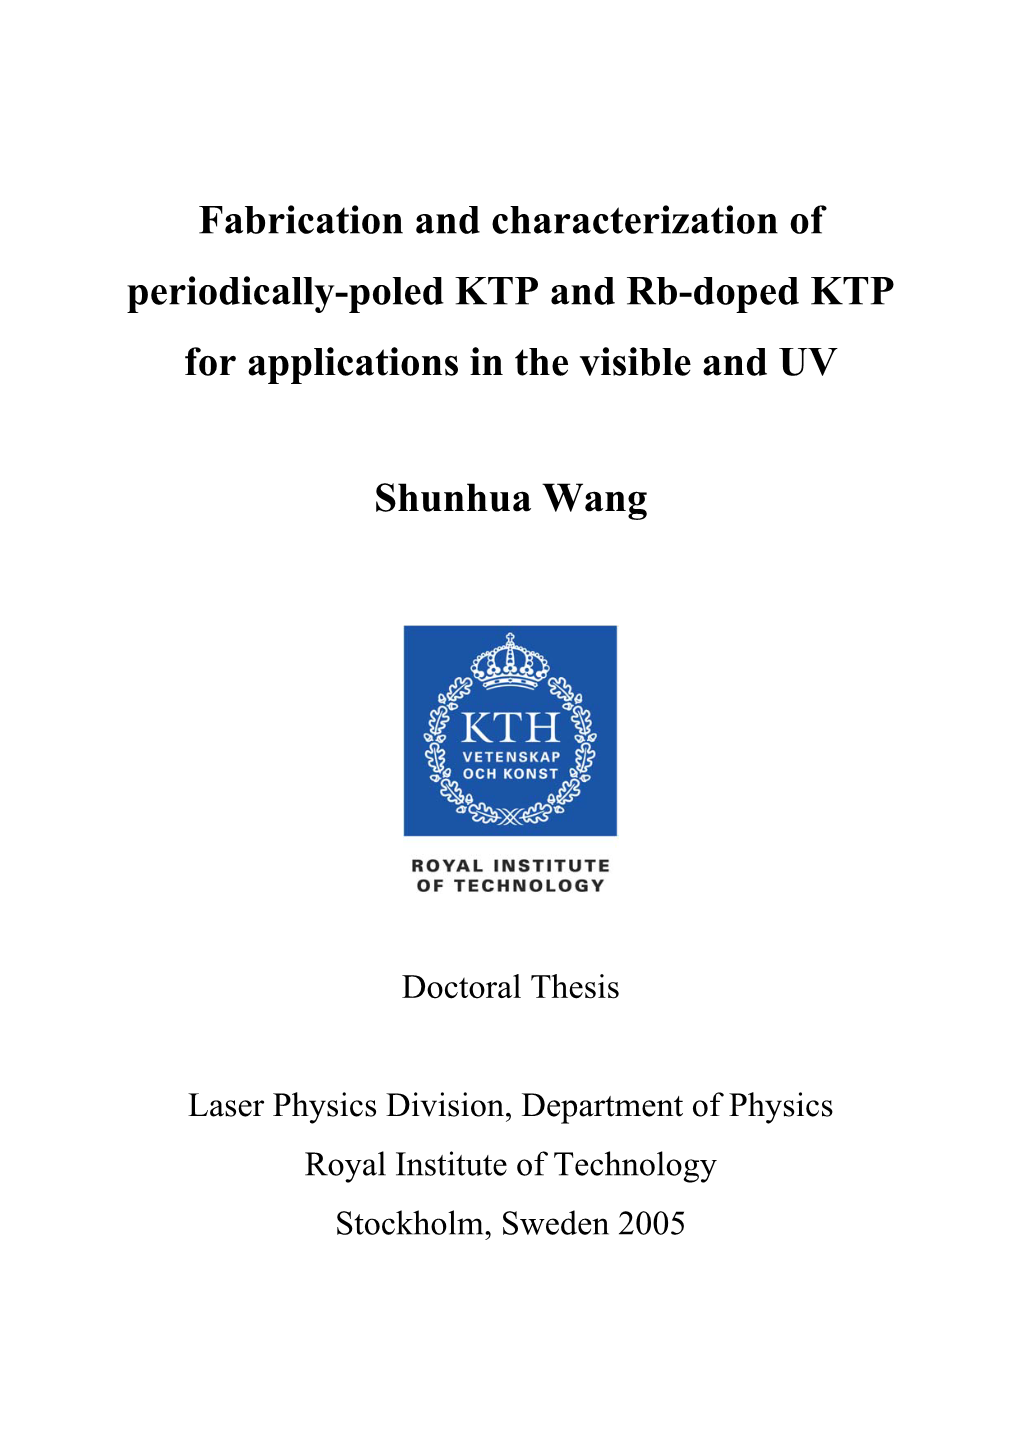 Fabrication and Characterization of Periodically-Poled KTP and Rb-Doped KTP for Applications in the Visible and UV